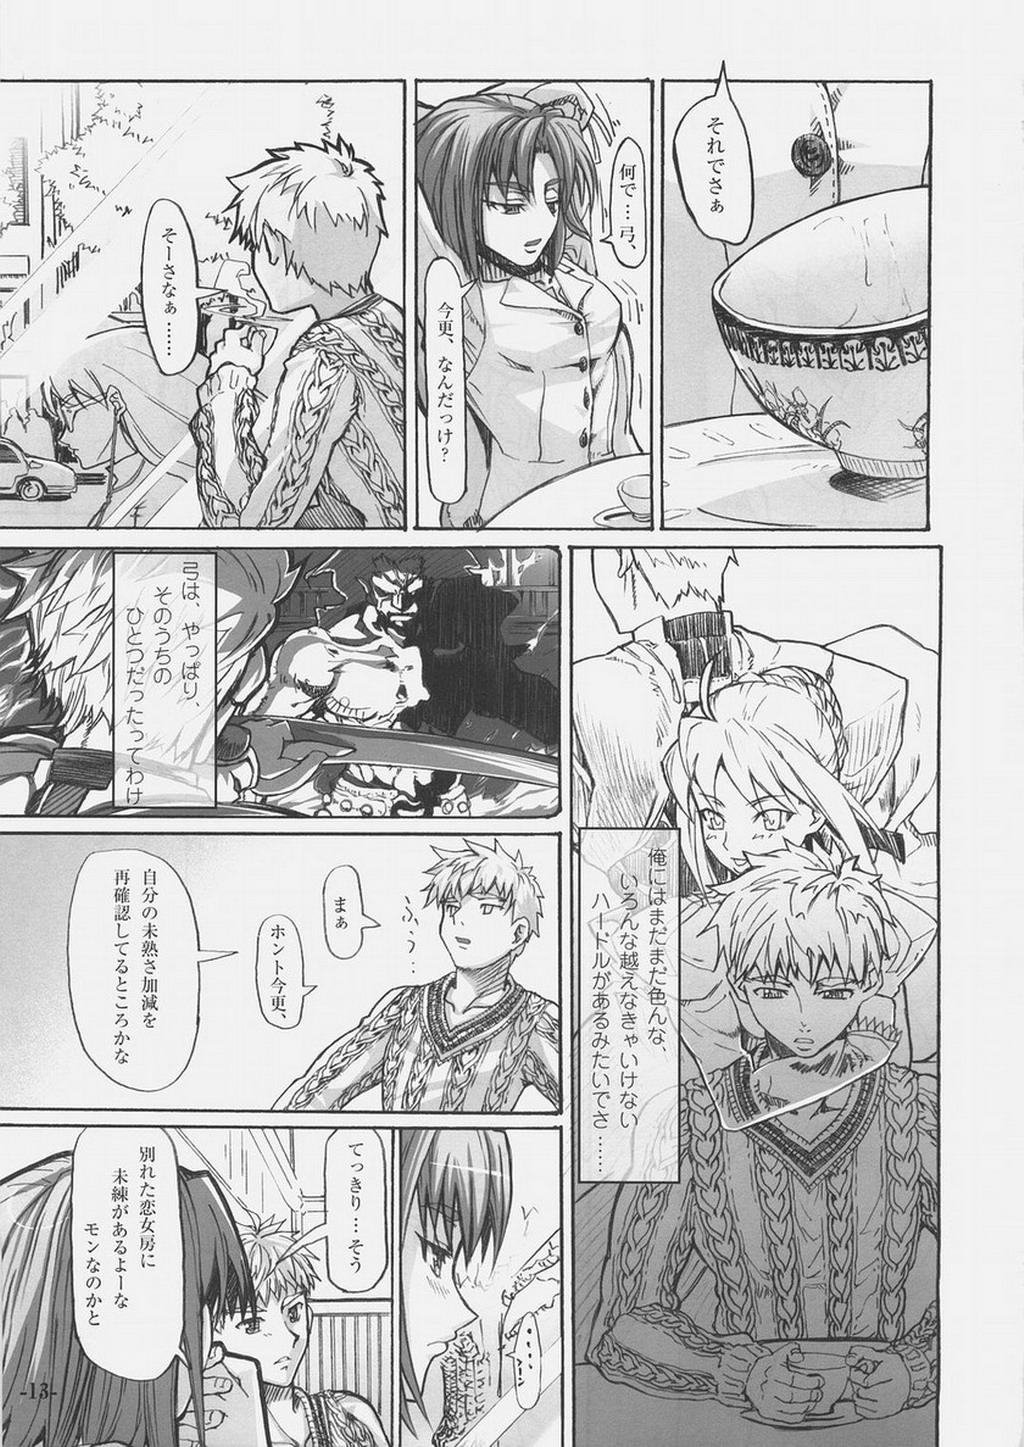 No Condom Light Her Fire! - Fate stay night Club - Page 12